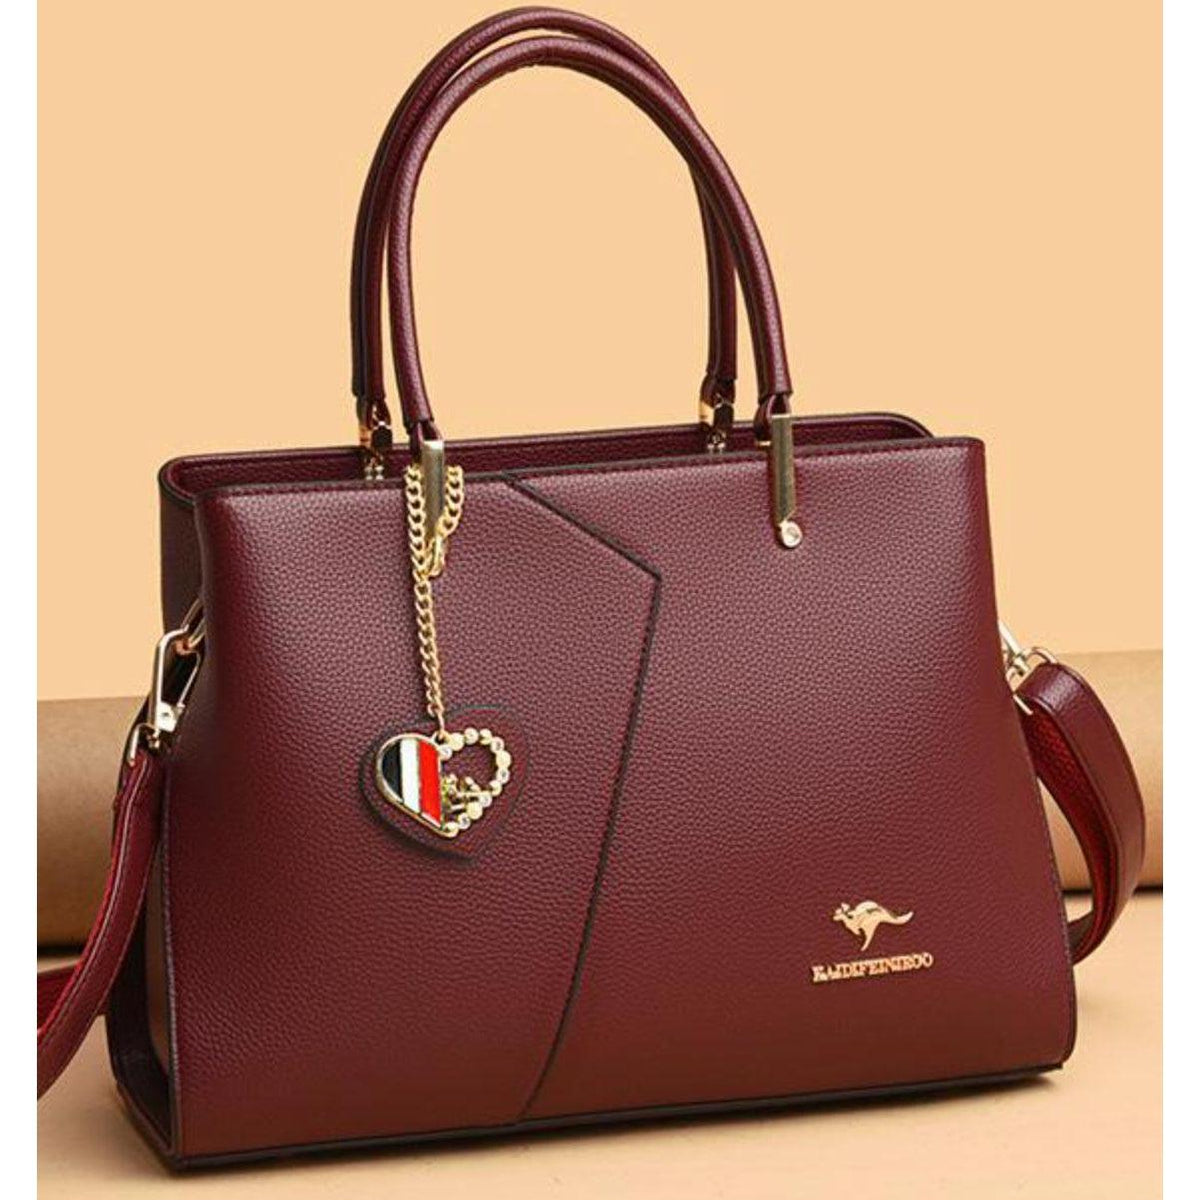 Large Classical Leather Handbag -Wine Red